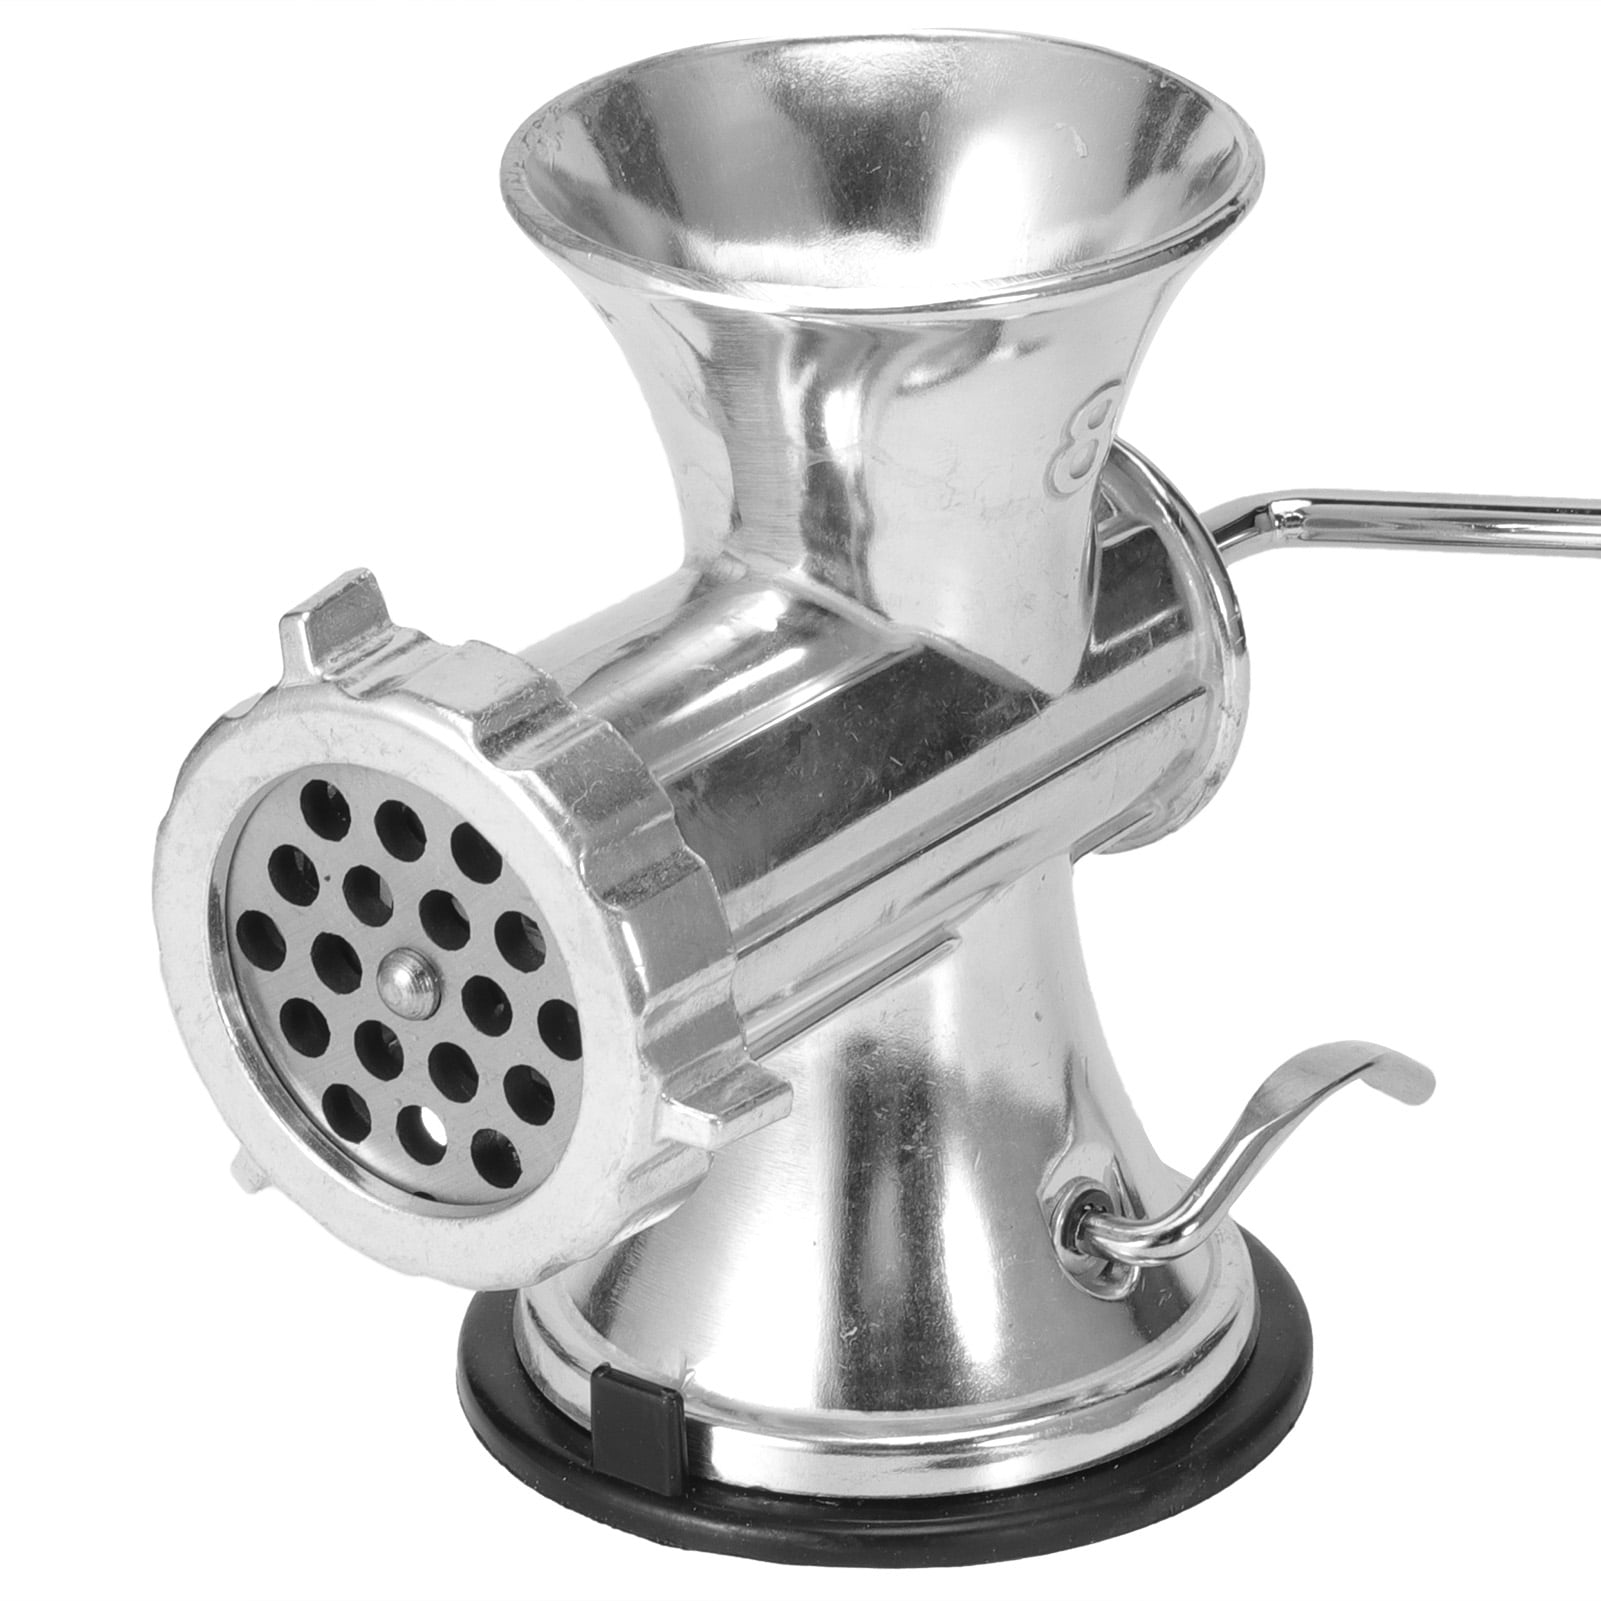 Dropship Meat Mincer Manual Meat Grinder Hand-Cranked Suction Base For Home Kitchen  Grind Meat Sausage Cookies Vegetables to Sell Online at a Lower Price